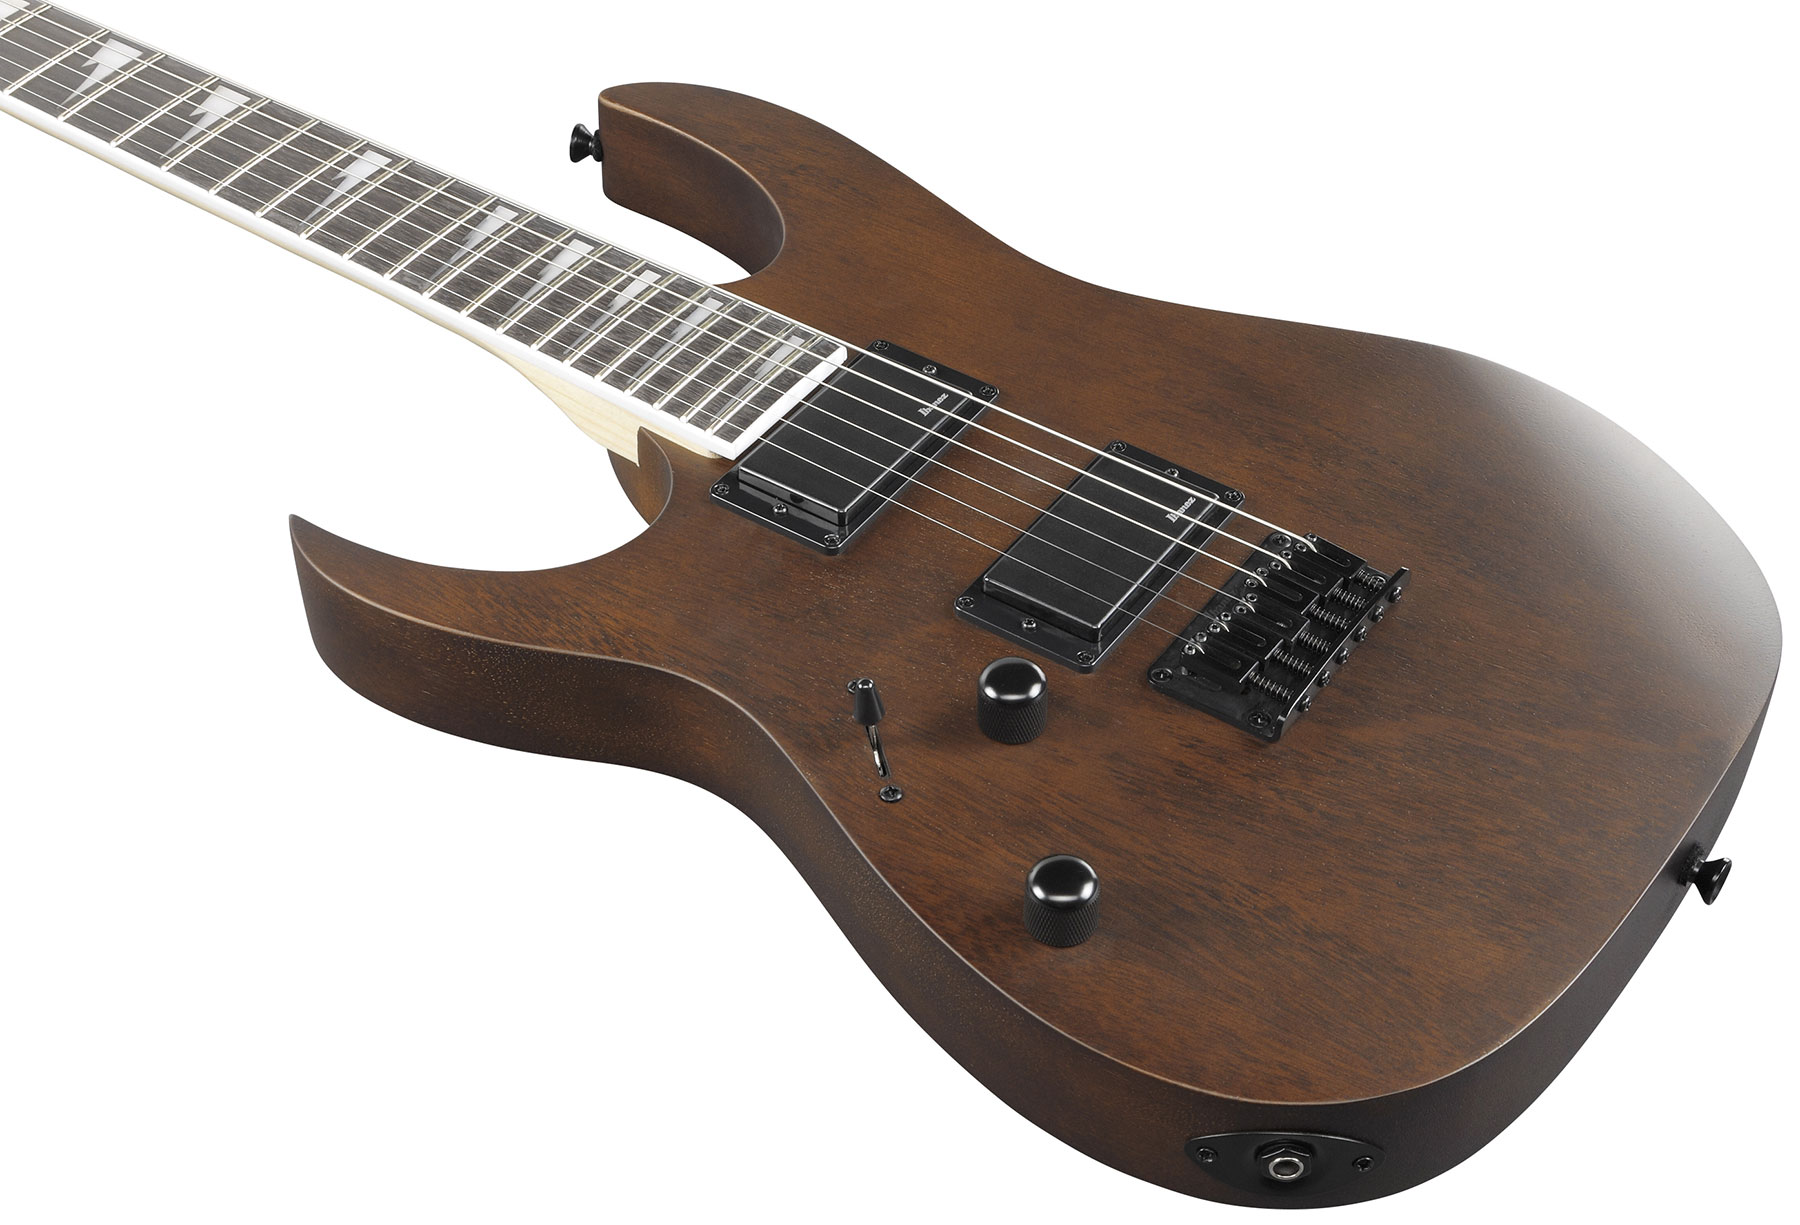 Ibanez Grg121dxl Wnf Gio Hh Ht Pur - Walnut Flat - Left-handed electric guitar - Variation 2